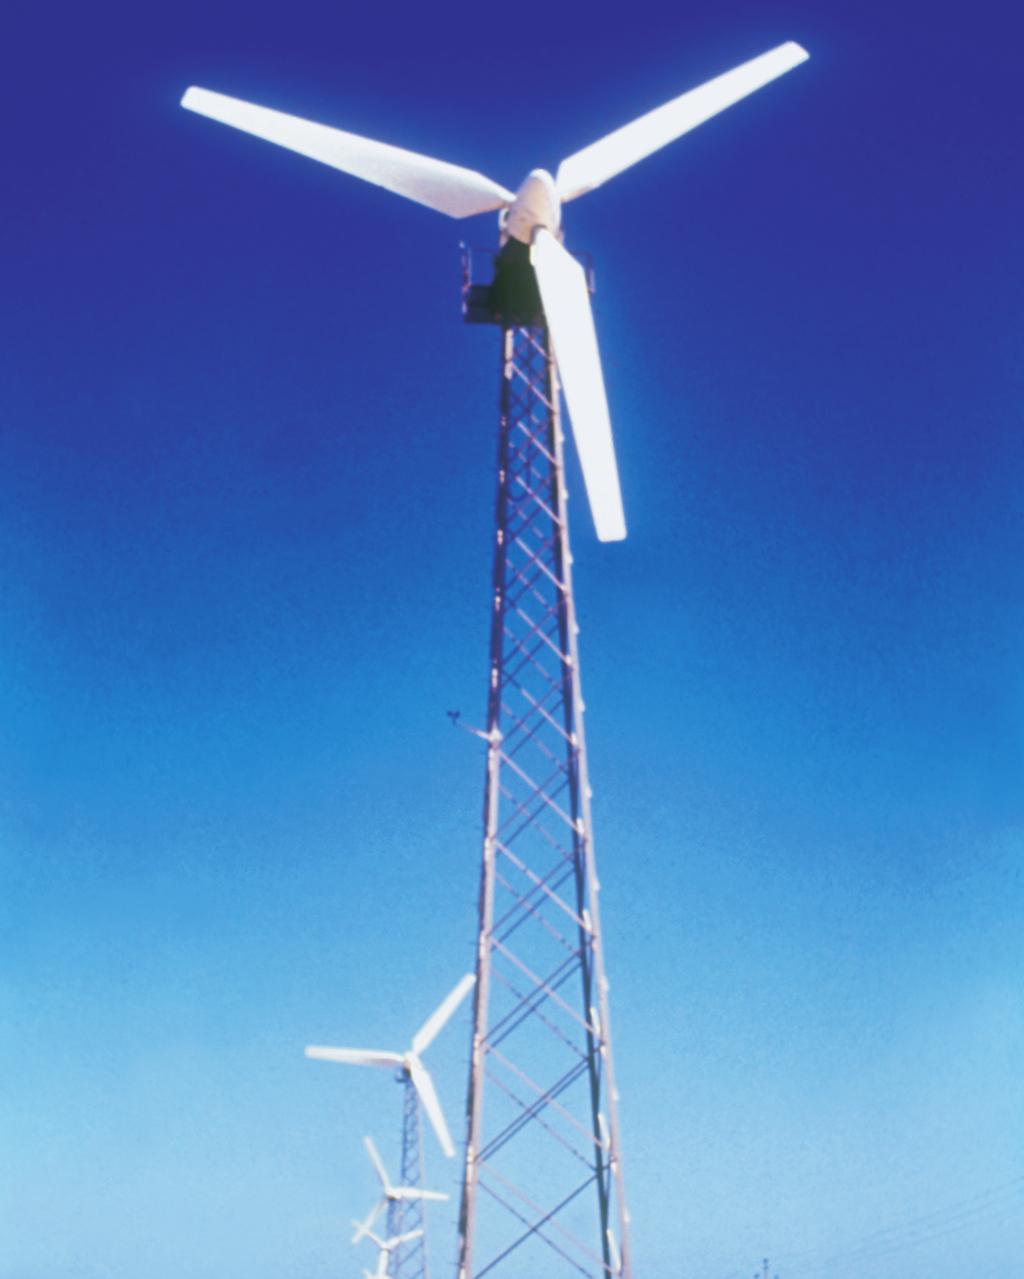 Wind Power Policy Wind Energy: Taking Advantage of the Shores Gujarat is blessed with a long coastline and good wind speeds for harnessing power from wind.